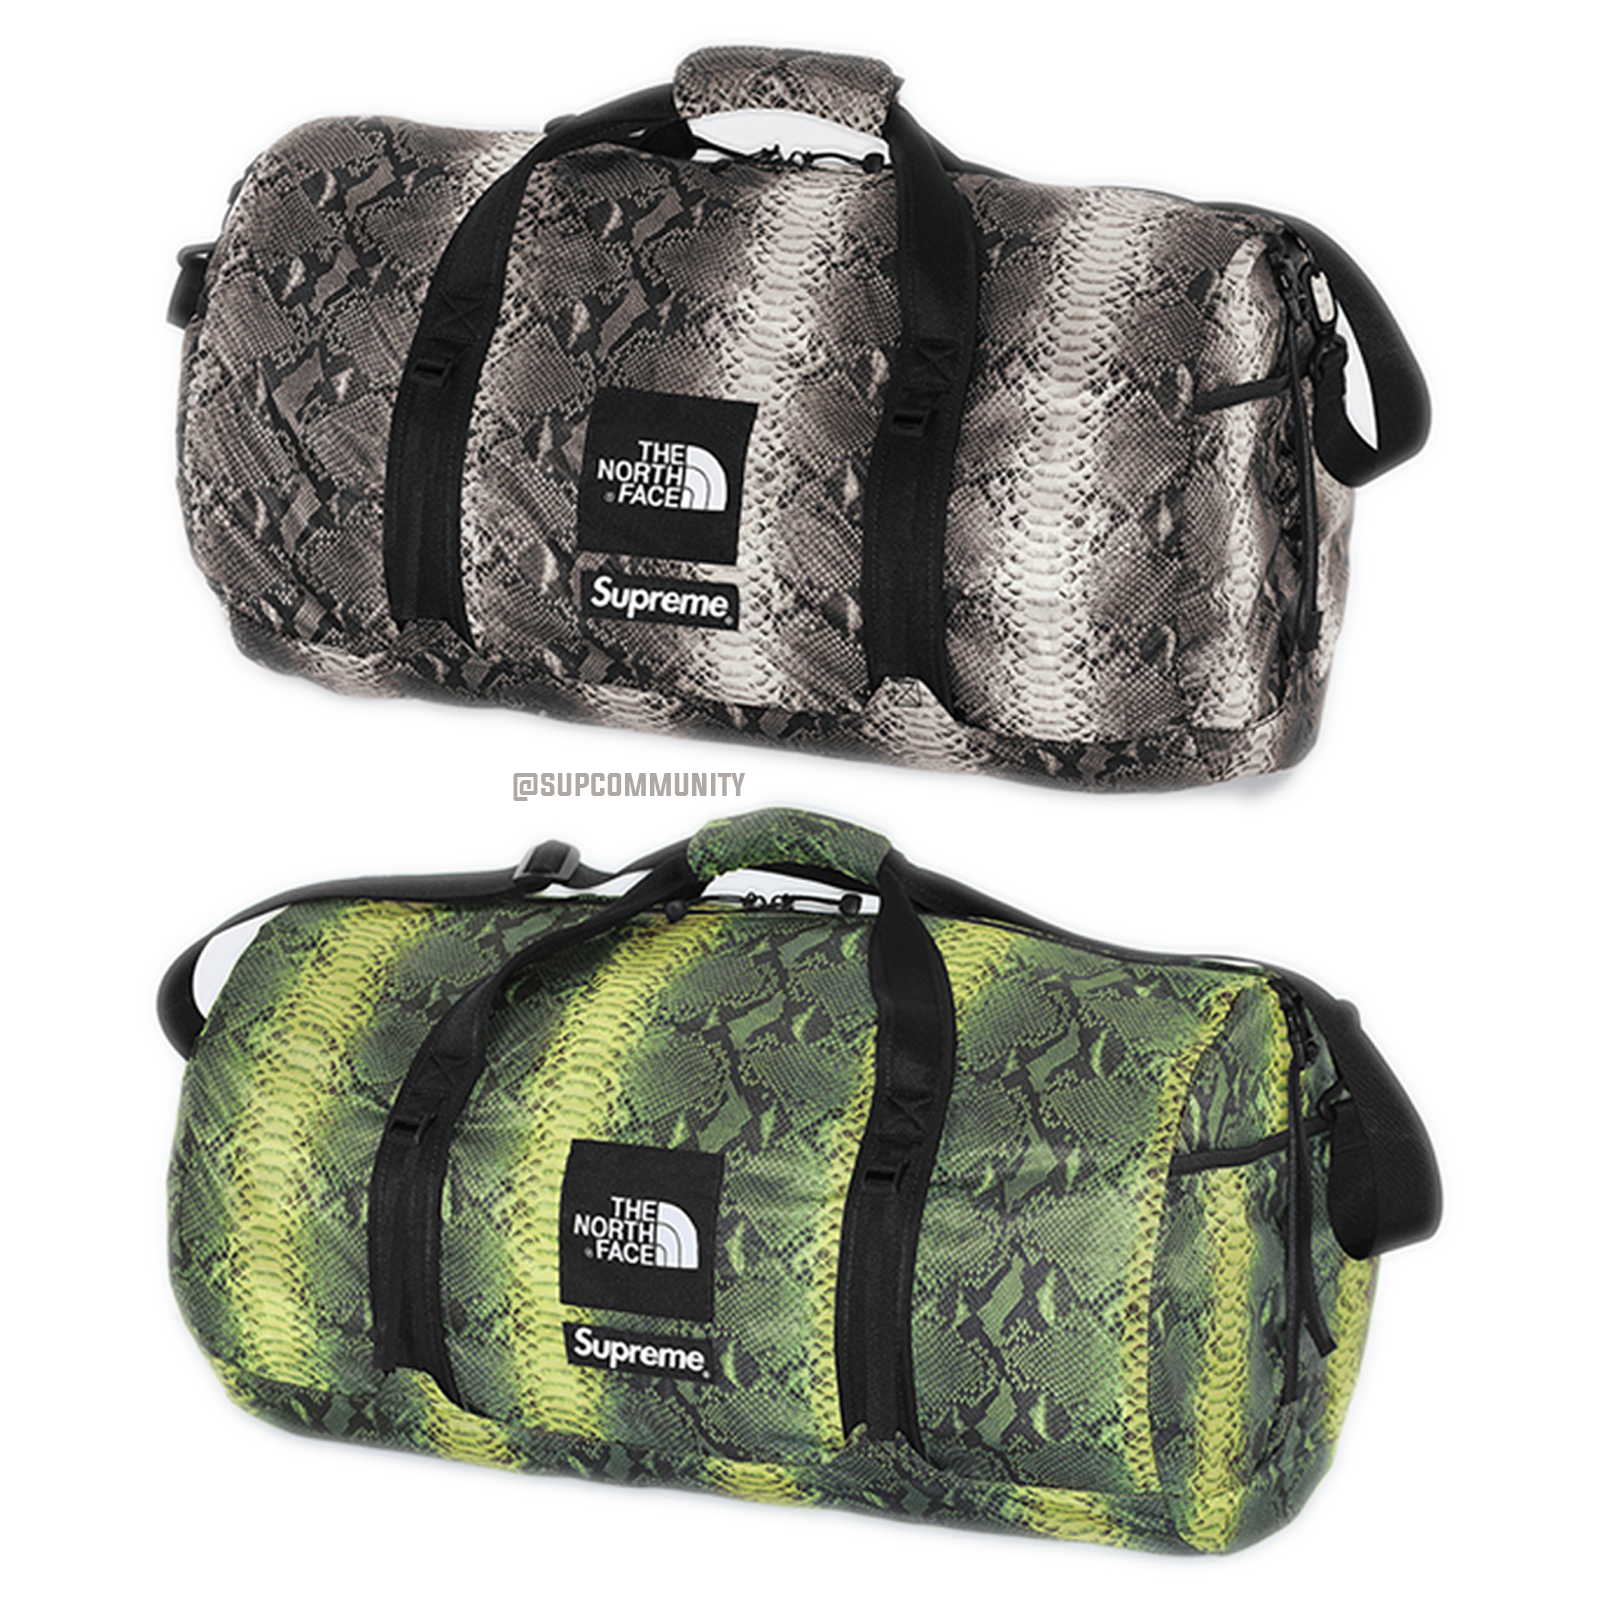 Supreme®/The North Face® Snakeskin Flyweight Duffle Bag - Supreme 